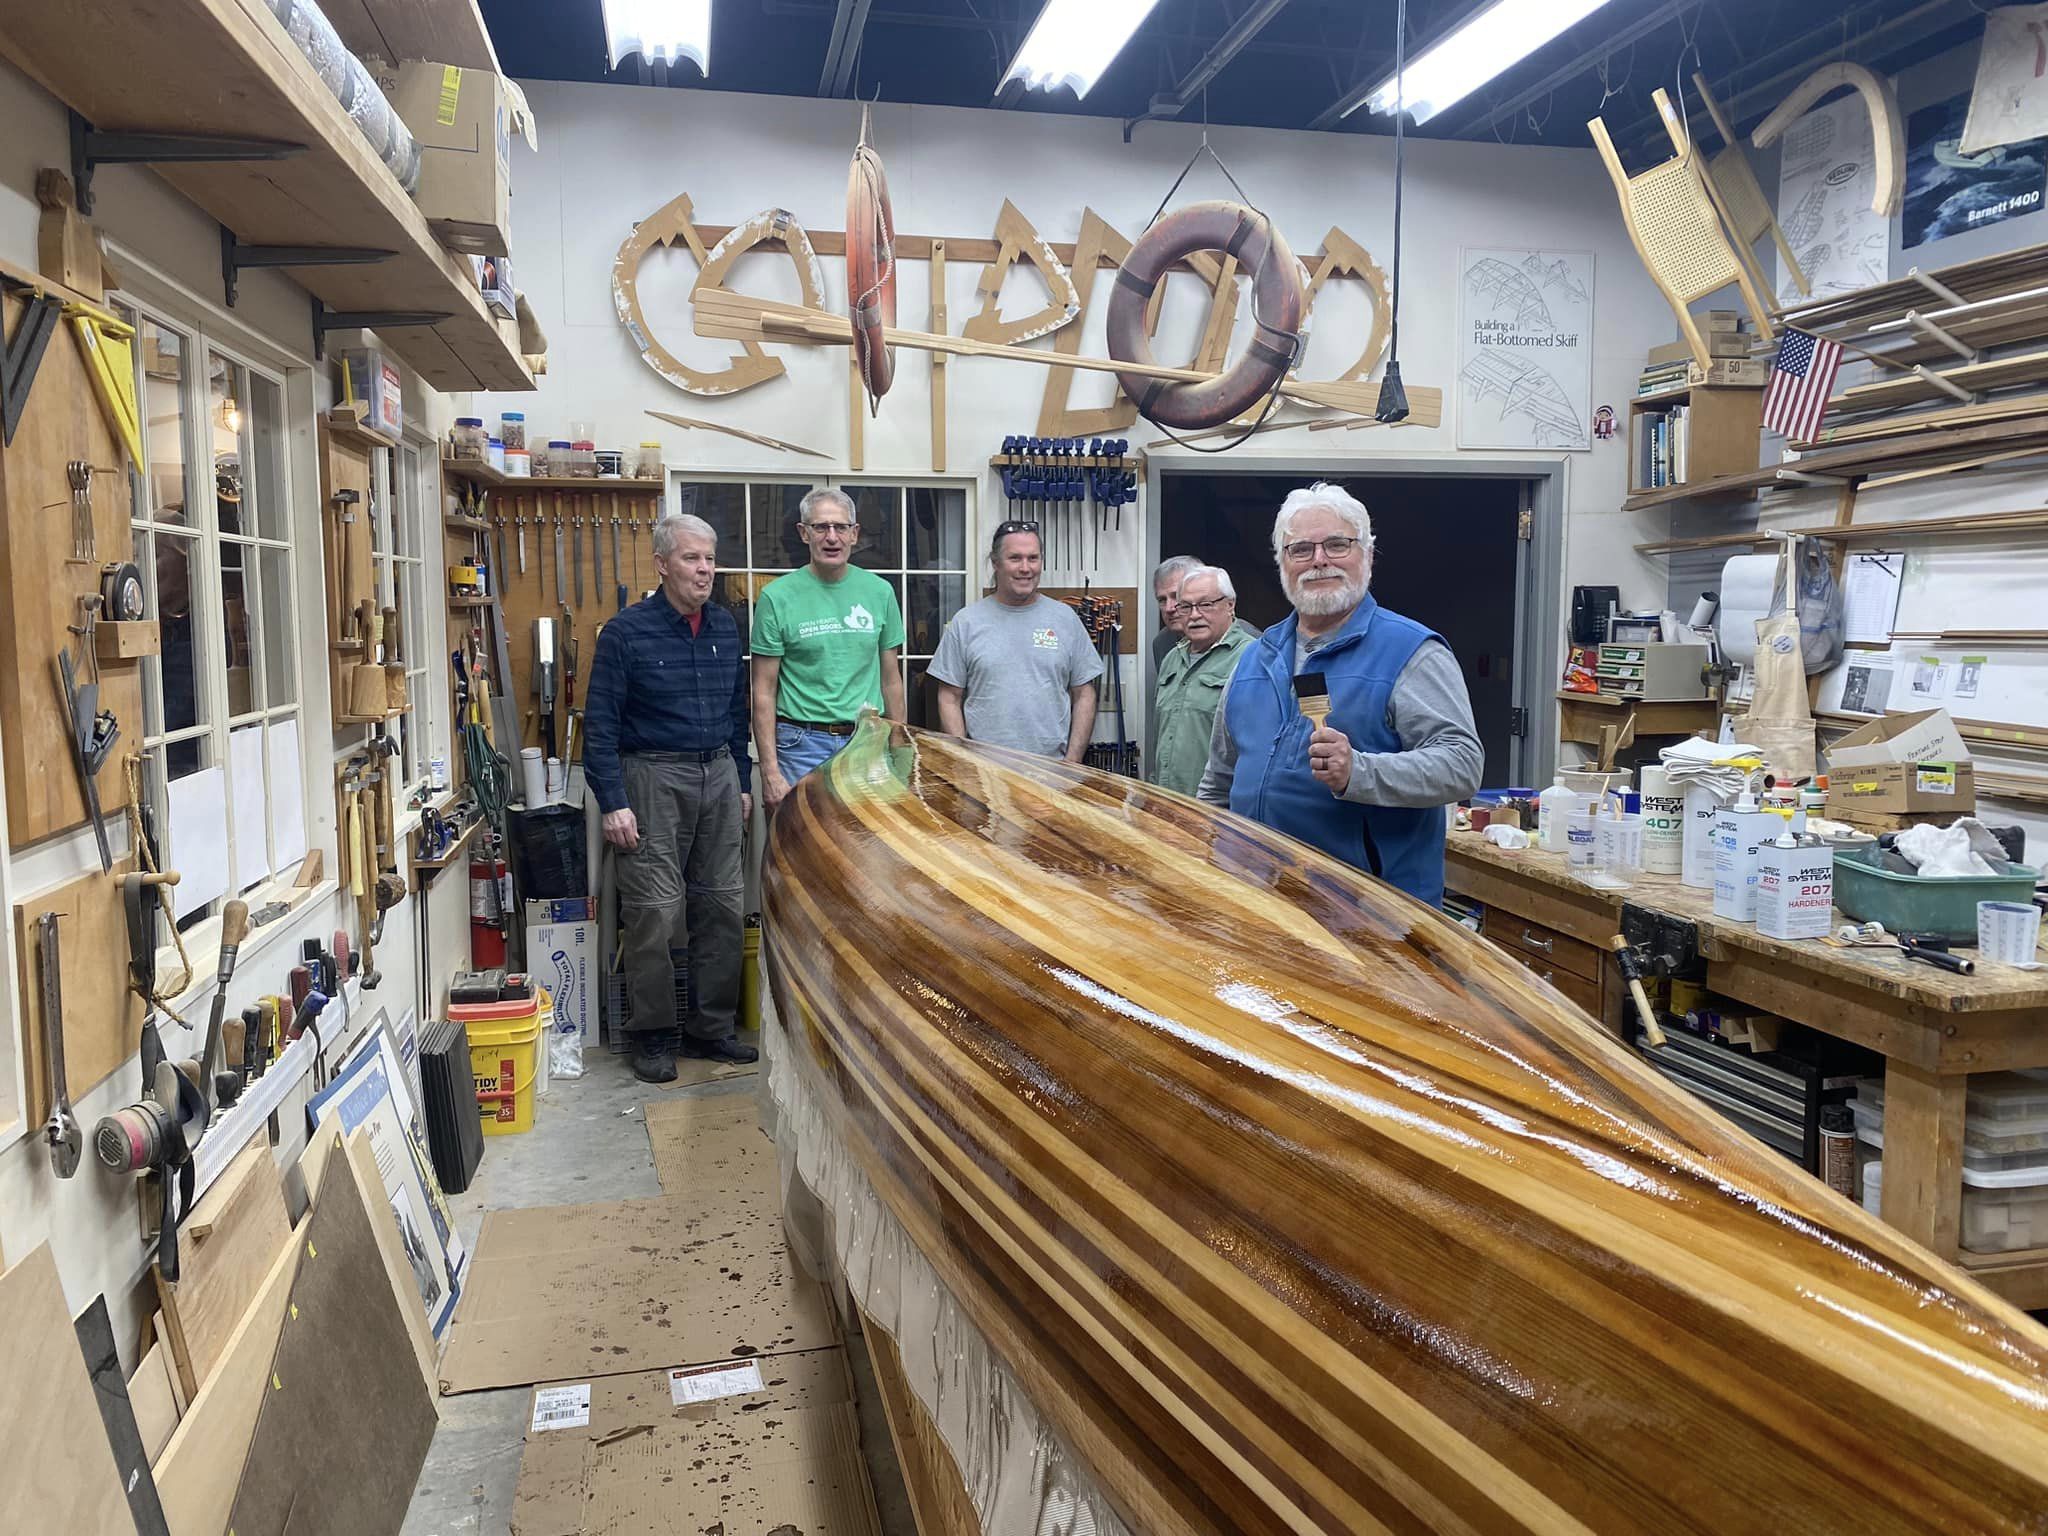 upside down canoe, shiny with first coat of resin. 6 men posing in background of canoe